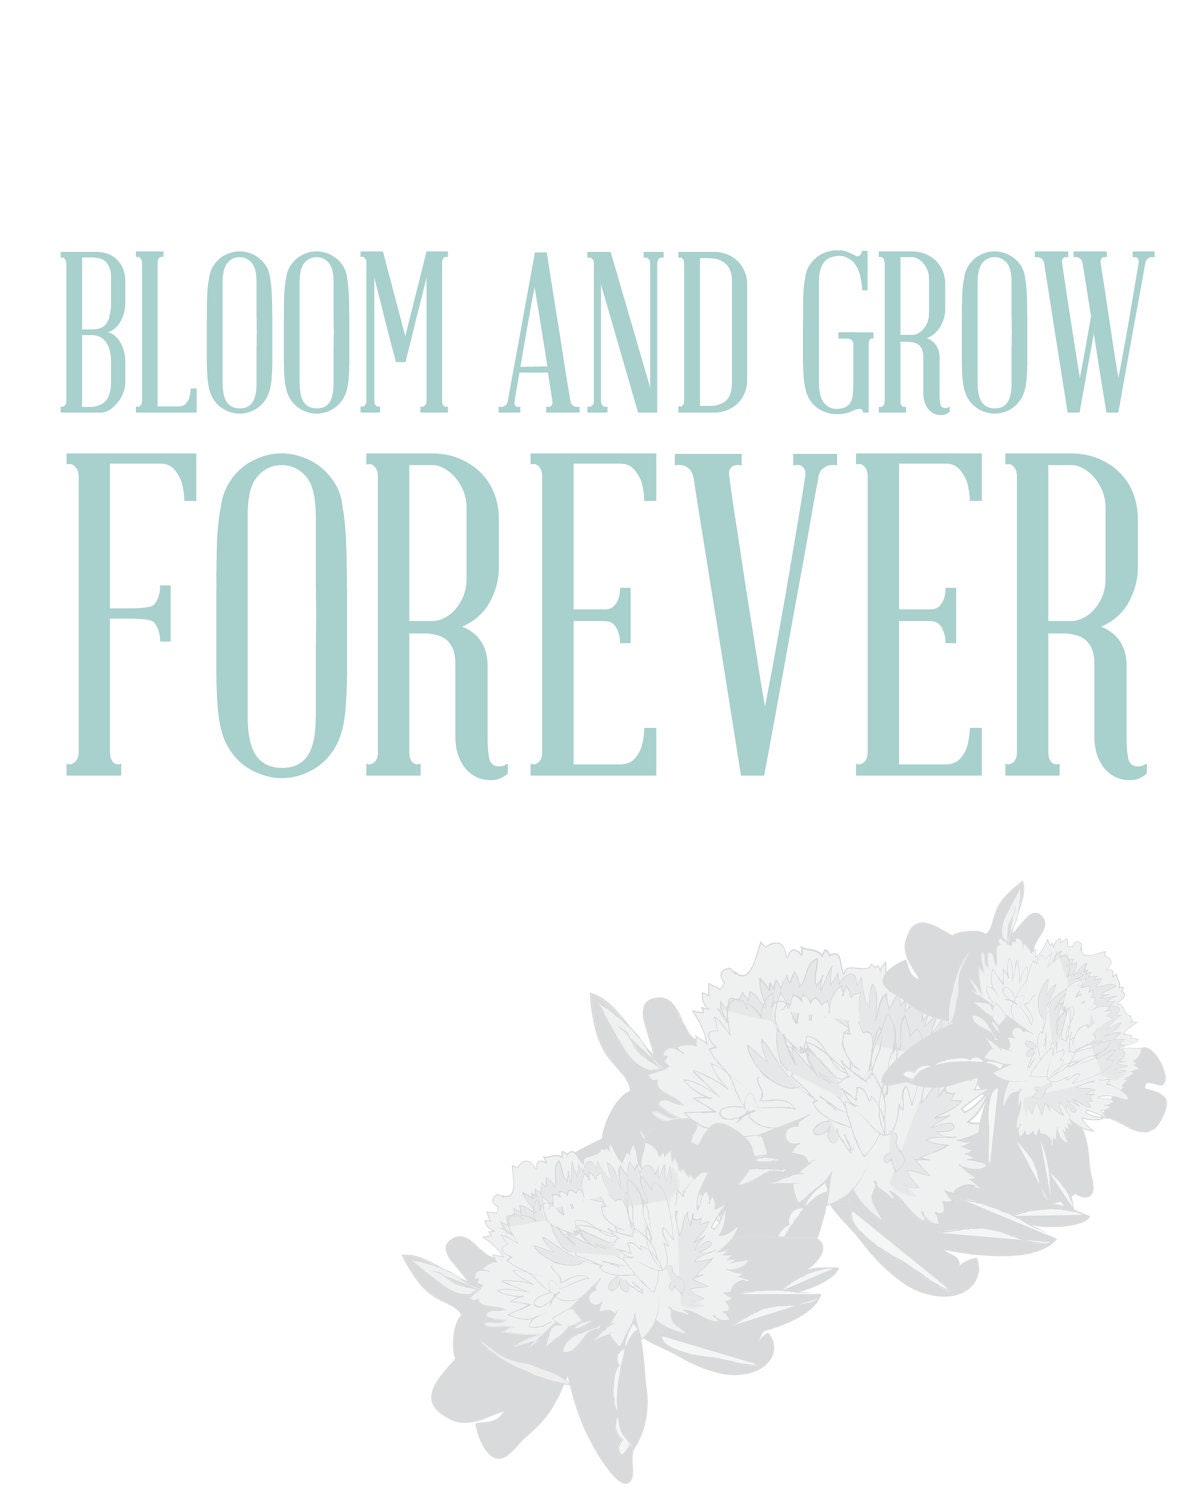 Edelweiss Bloom and Grow Forever Print - OrganicBird